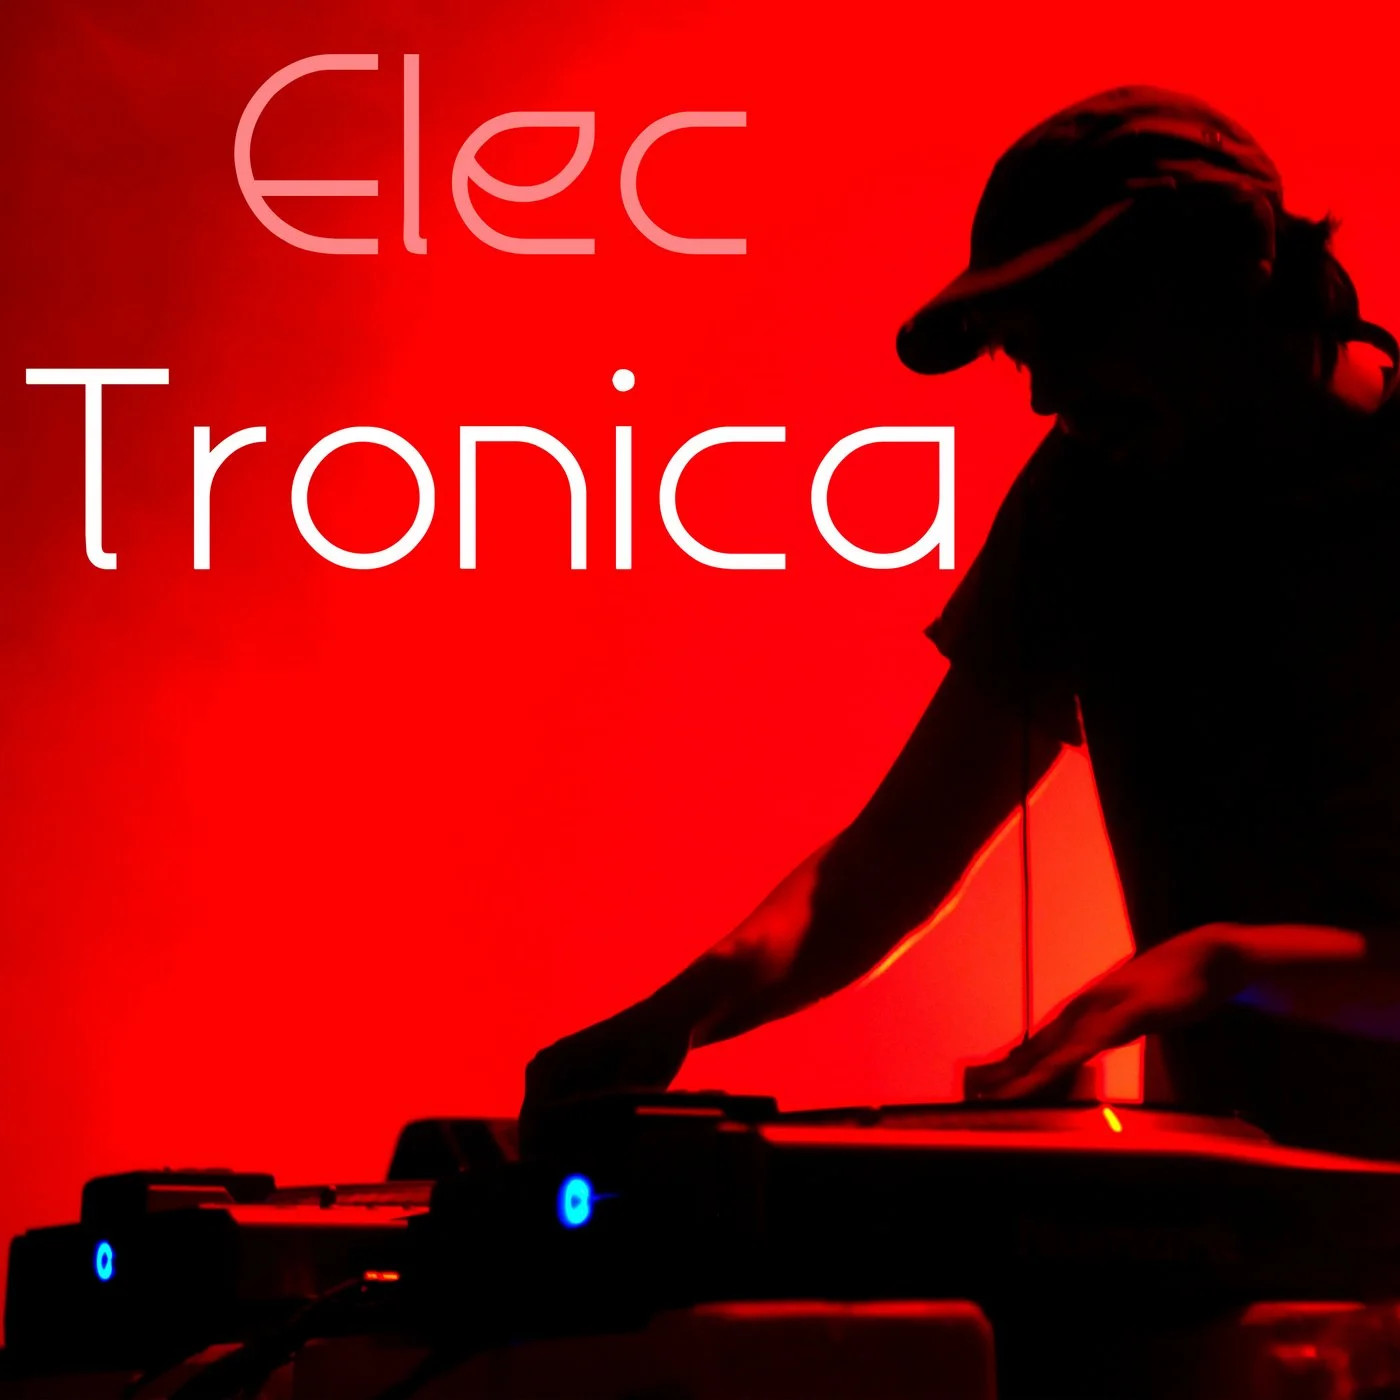 The Smiling Buddhas contributed "A'dam" to the 34 tracks compilation "Elec Tronica" released by Everlasting Sensation from the album "All-Nighter" (base).